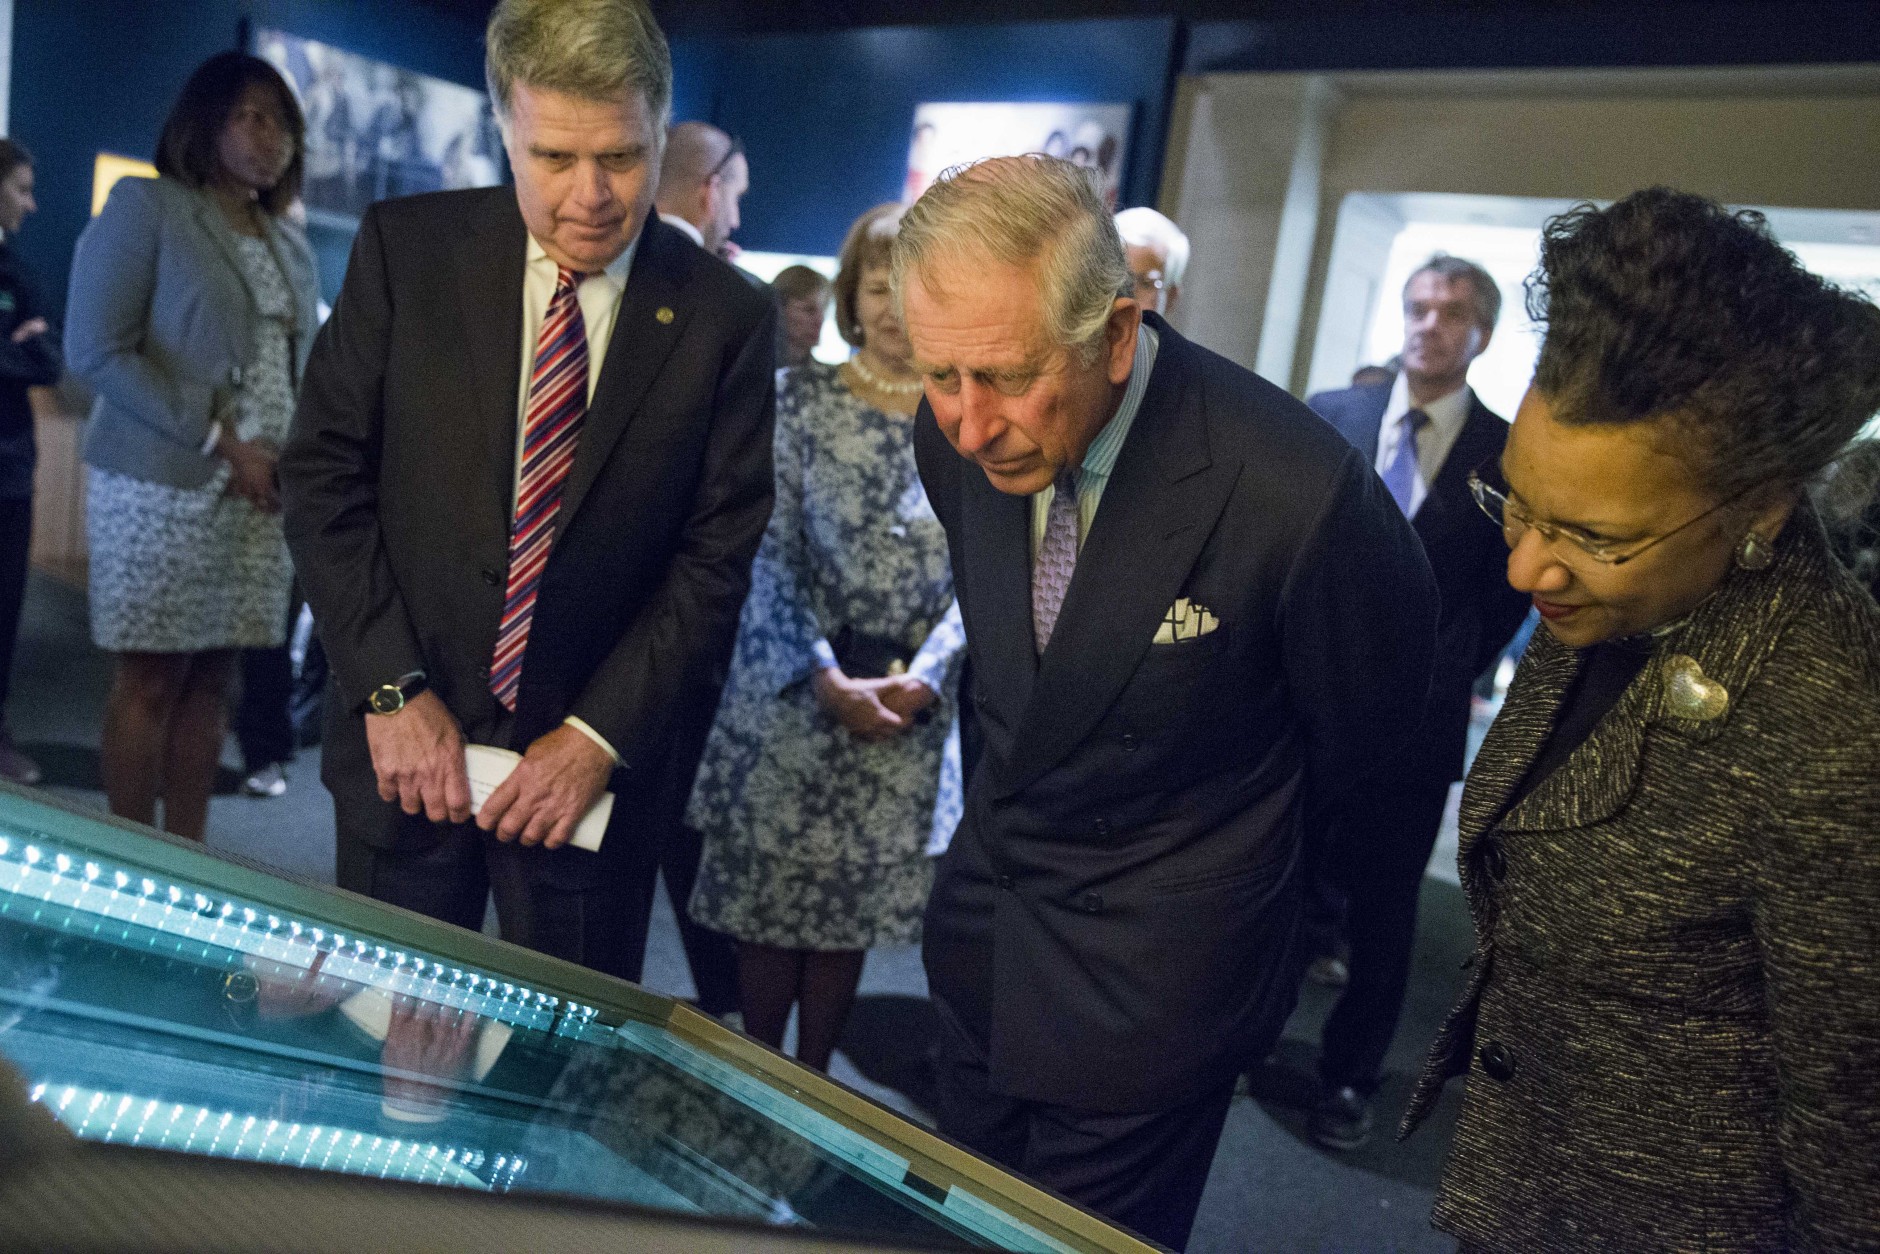 Britain's Prince Charles looks at an original copy of the Magna Carta during a visit to the National Archives in Washington, Wednesday, March 18, 2015. Prince Charles and his wife Camilla, Duchess of Cornwall, are scheduled to visit cultural and educational sites over the next three days. (AP Photo/ Evan Vucci)